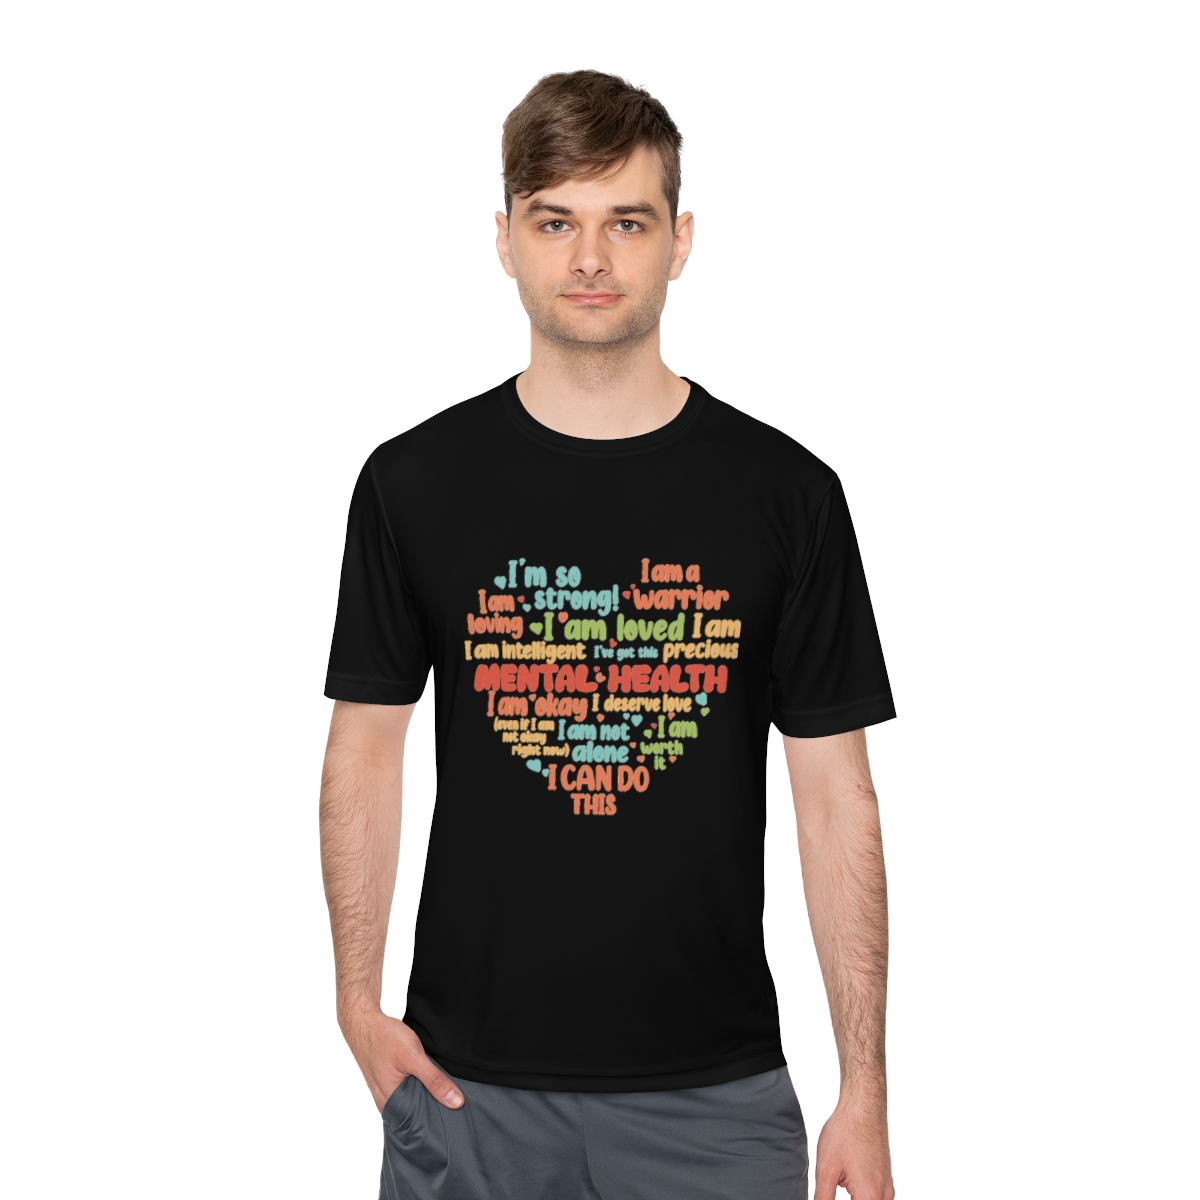 Inspirational and Motivational Recovery T-shirt is All About Self-Love! #gymwear #athletic #exercise product thumbnail image